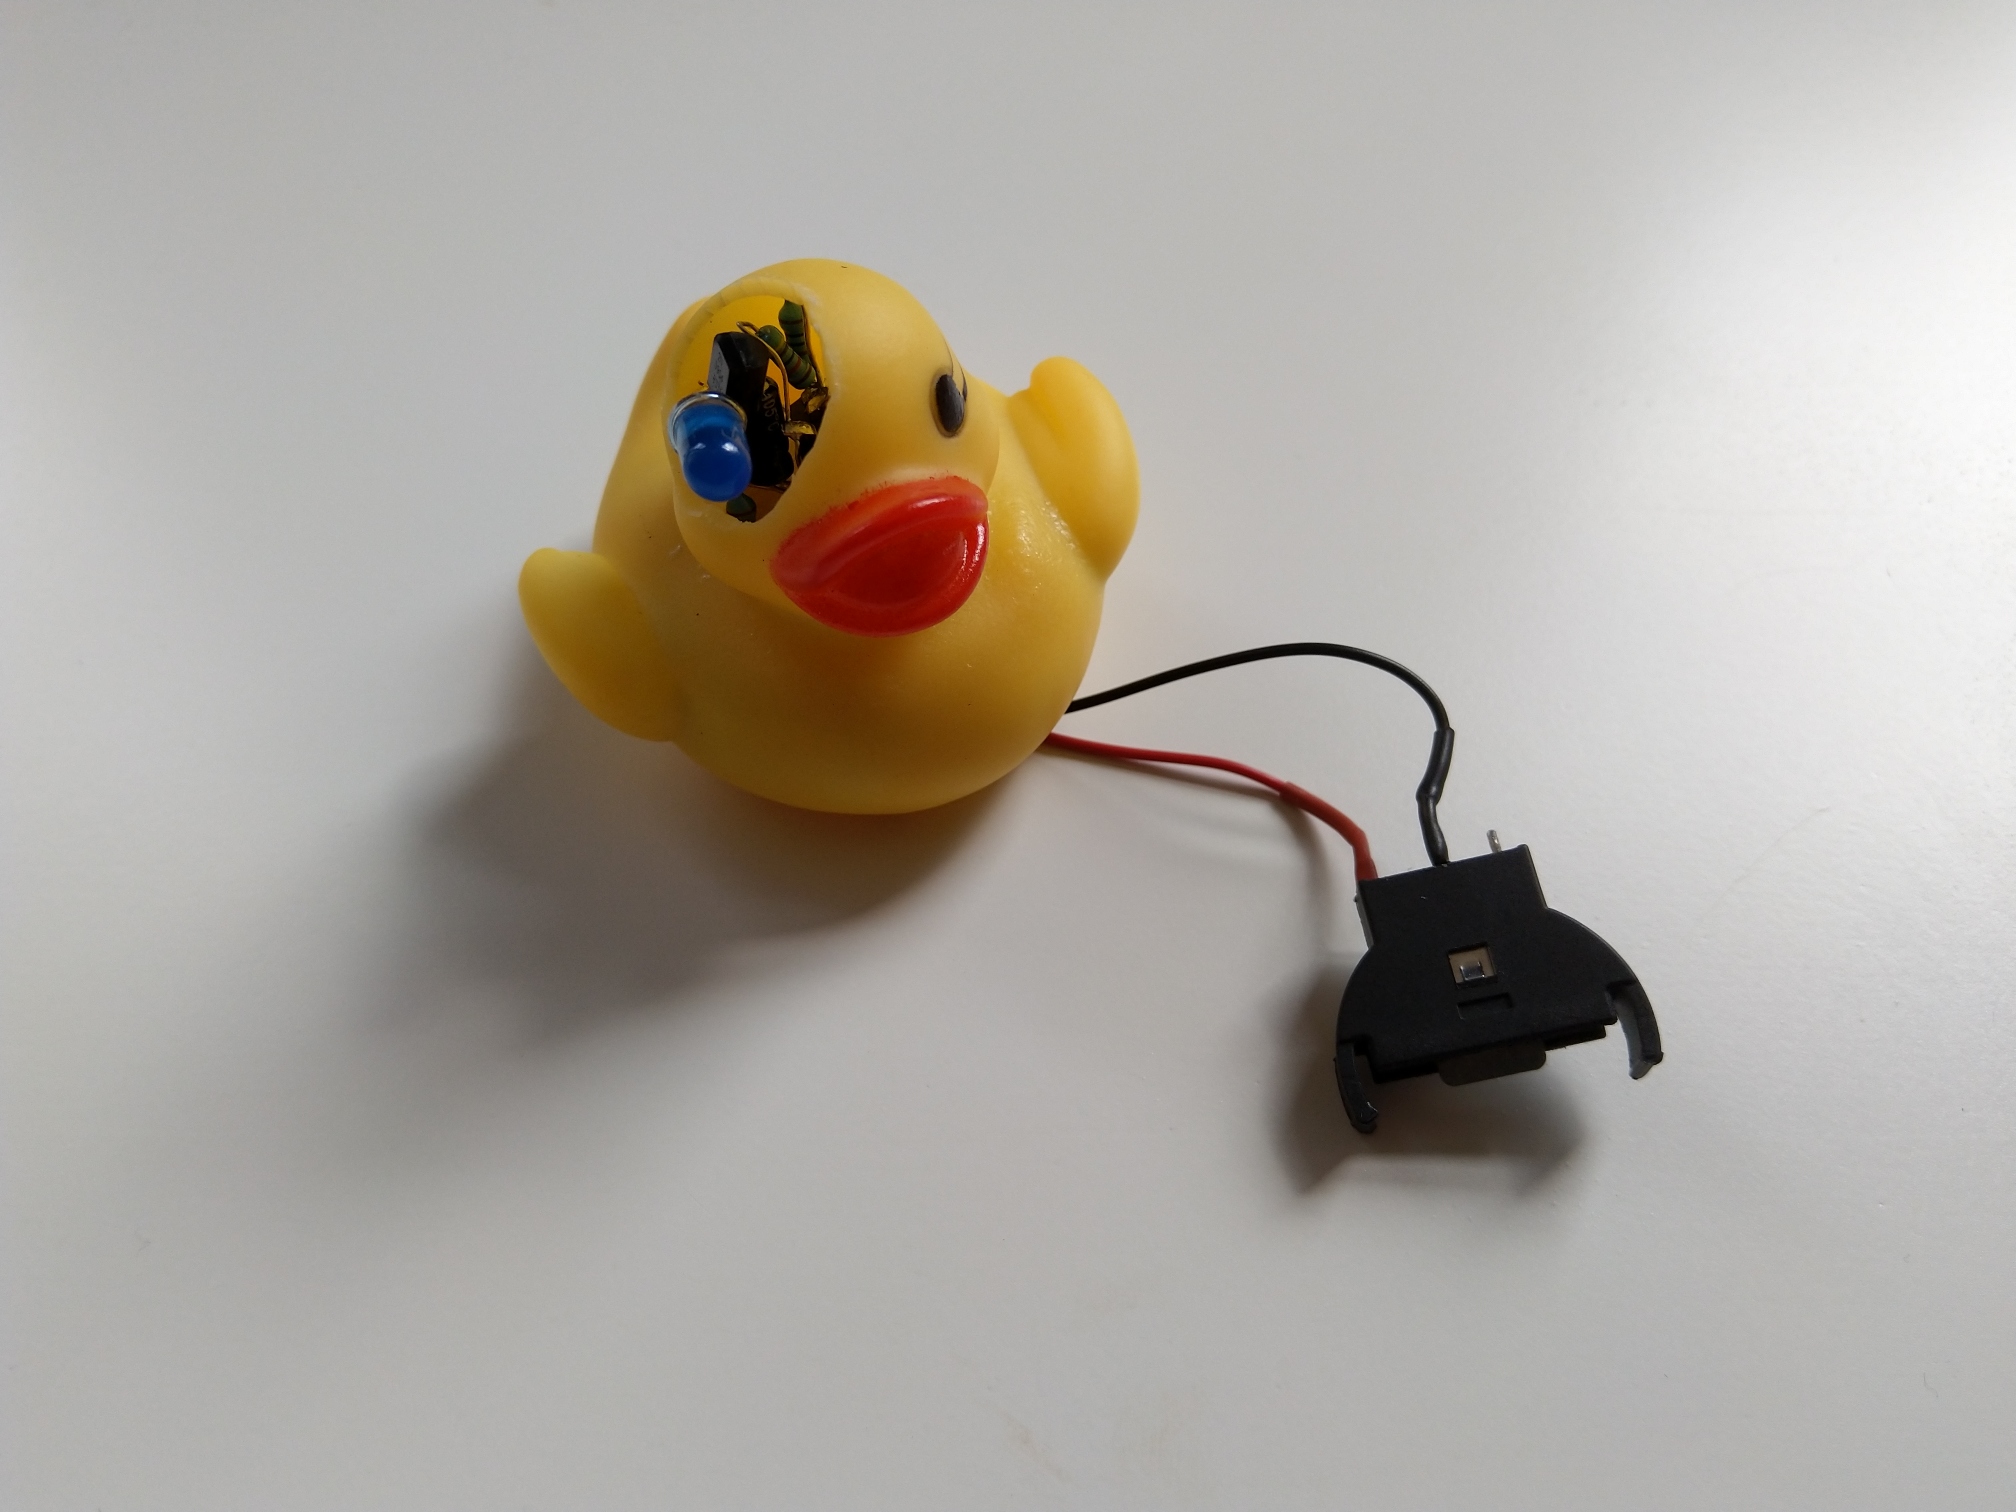 All finished with a battery holder. The battery holder can be easily stuffed into duck's body.